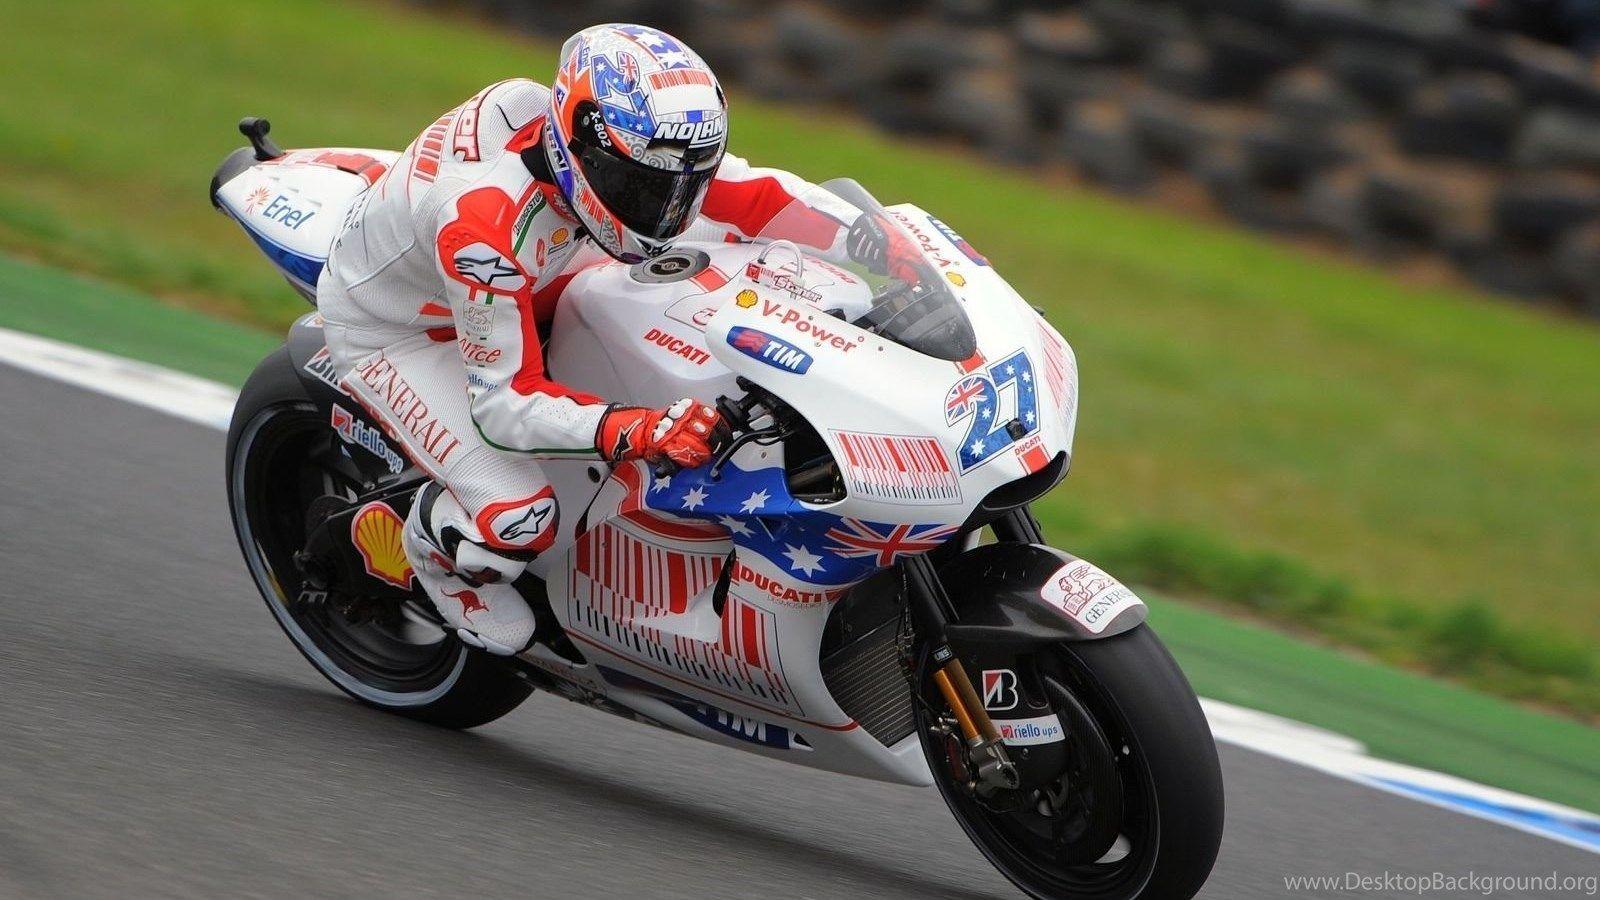 Casey Stoner HD Wallpaper for iPhone 6 Plus